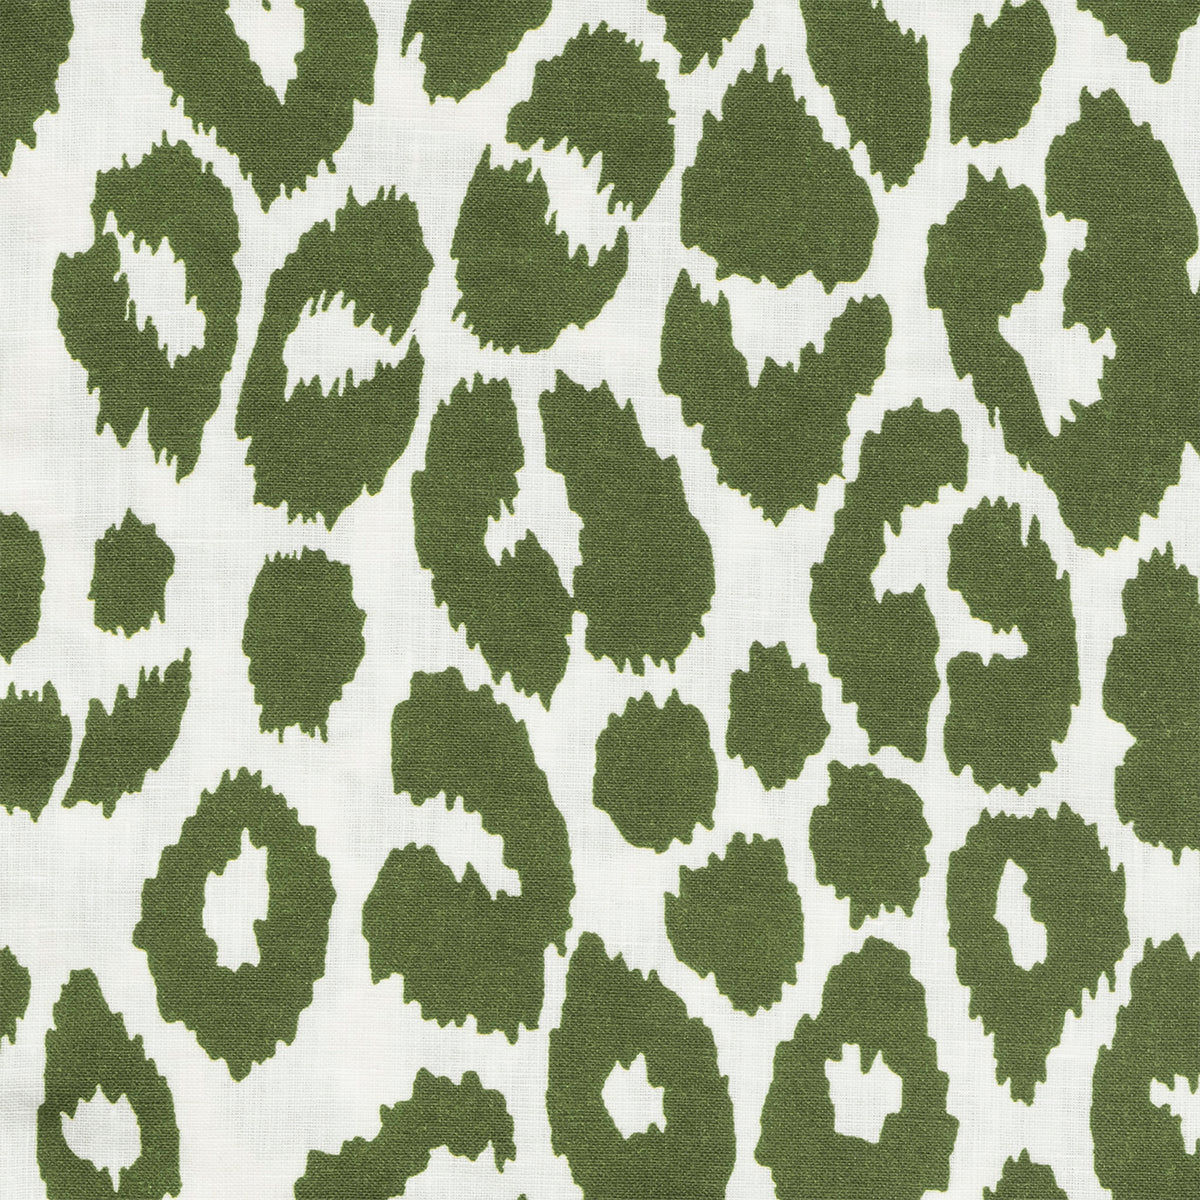 Swatch Sample of Matouk Schumacher Iconic Leopard Table Linens in Color Green